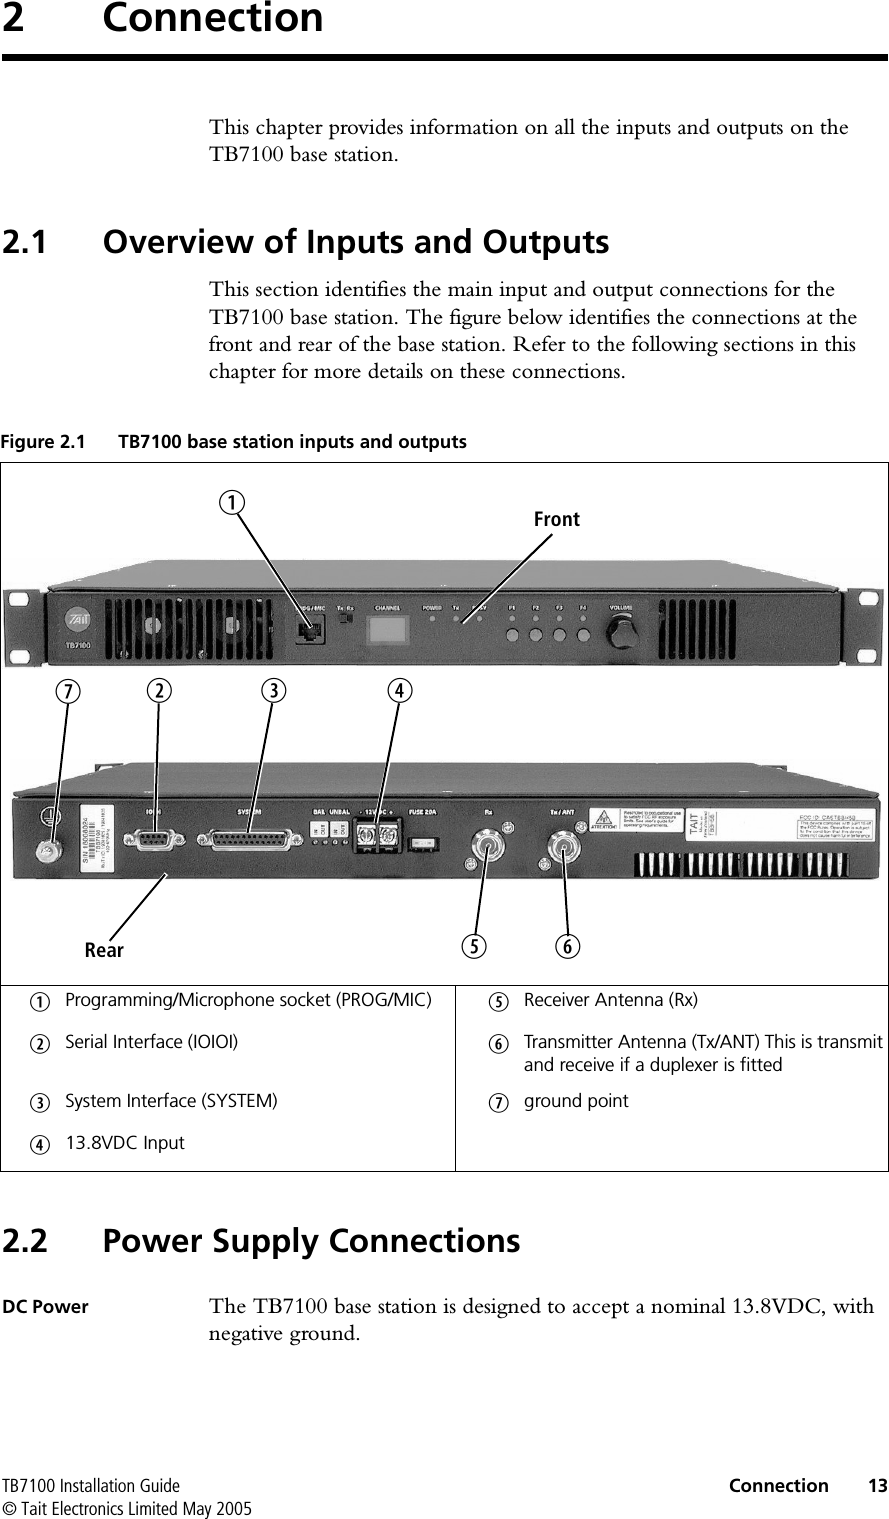  TB7100 Installation Guide Connection 13© Tait Electronics Limited May 20052 ConnectionThis chapter provides information on all the inputs and outputs on the TB7100 base station.2.1 Overview of Inputs and OutputsThis section identifies the main input and output connections for the TB7100 base station. The figure below identifies the connections at the front and rear of the base station. Refer to the following sections in this chapter for more details on these connections.2.2 Power Supply ConnectionsDC Power The TB7100 base station is designed to accept a nominal 13.8VDC, with negative ground.Figure 2.1 TB7100 base station inputs and outputsbProgramming/Microphone socket (PROG/MIC) fReceiver Antenna (Rx)cSerial Interface (IOIOI) gTransmitter Antenna (Tx/ANT) This is transmit and receive if a duplexer is fitteddSystem Interface (SYSTEM) hground pointe13.8VDC InputbcedhgfRearFront